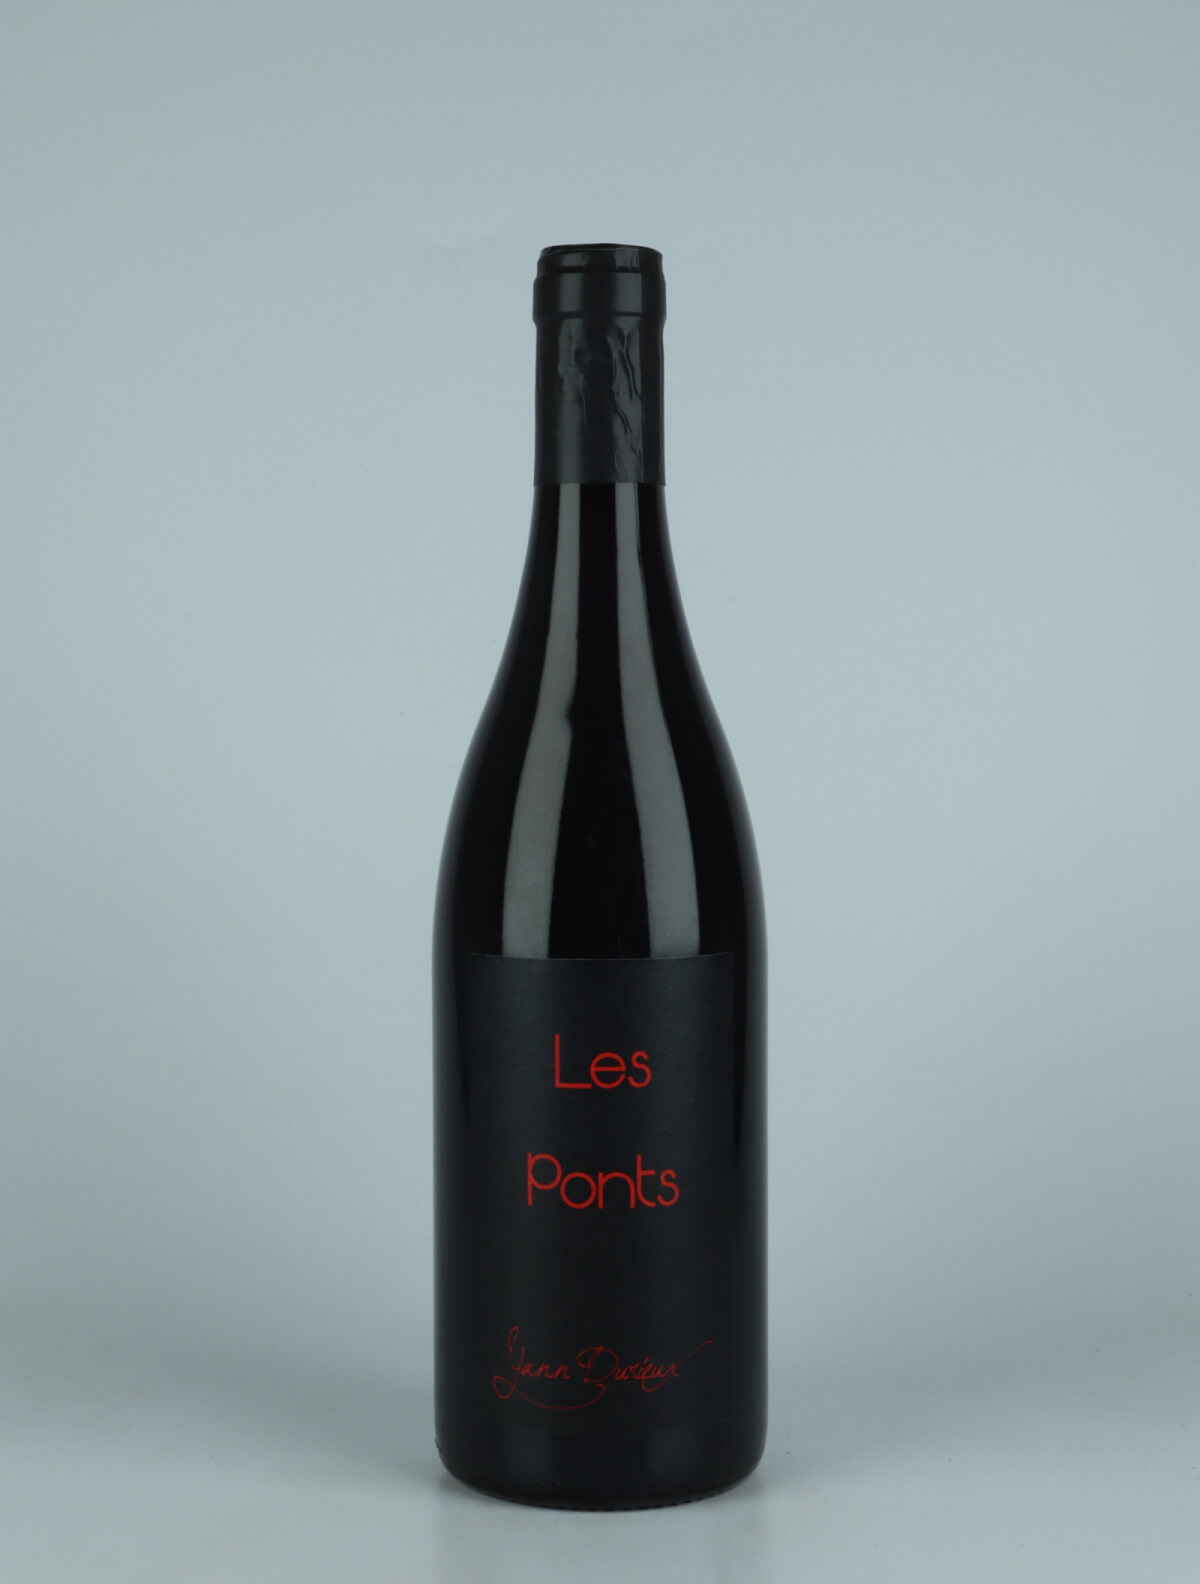 A bottle 2021 Les Ponts Red wine from Yann Durieux, Burgundy in France